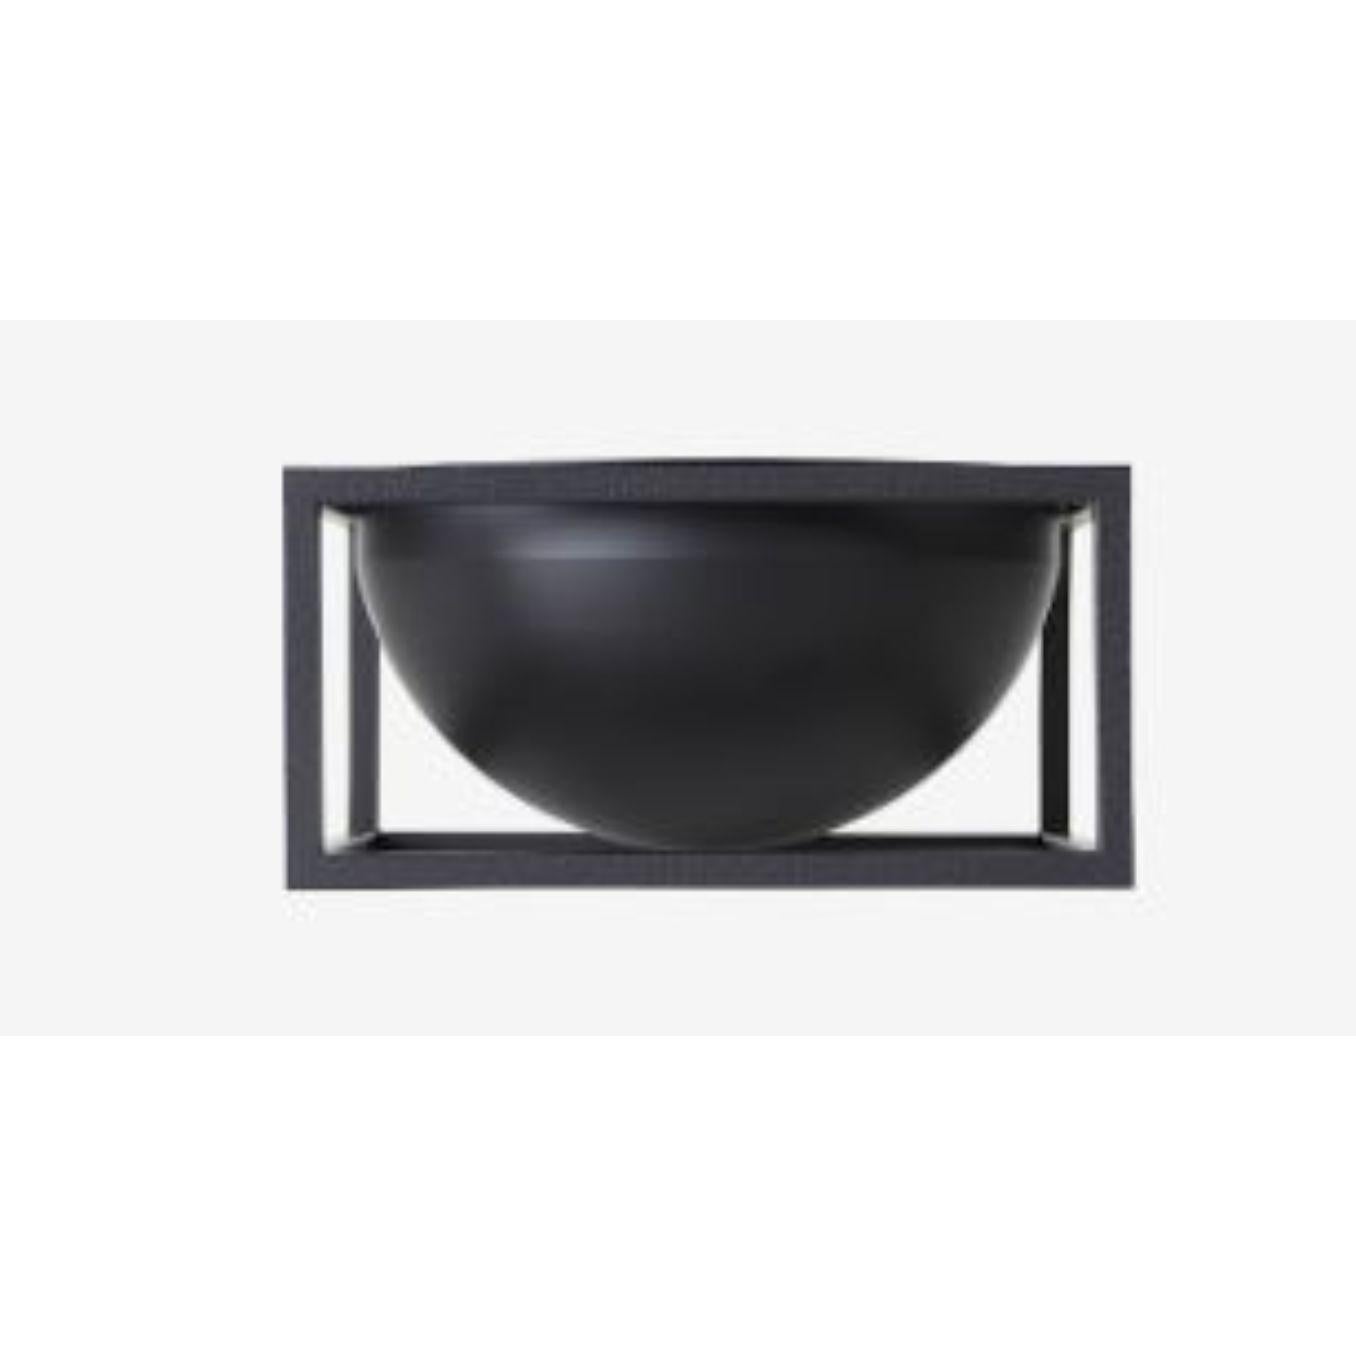 Other Black Small Centerpiece Kubus Bowl by Lassen For Sale